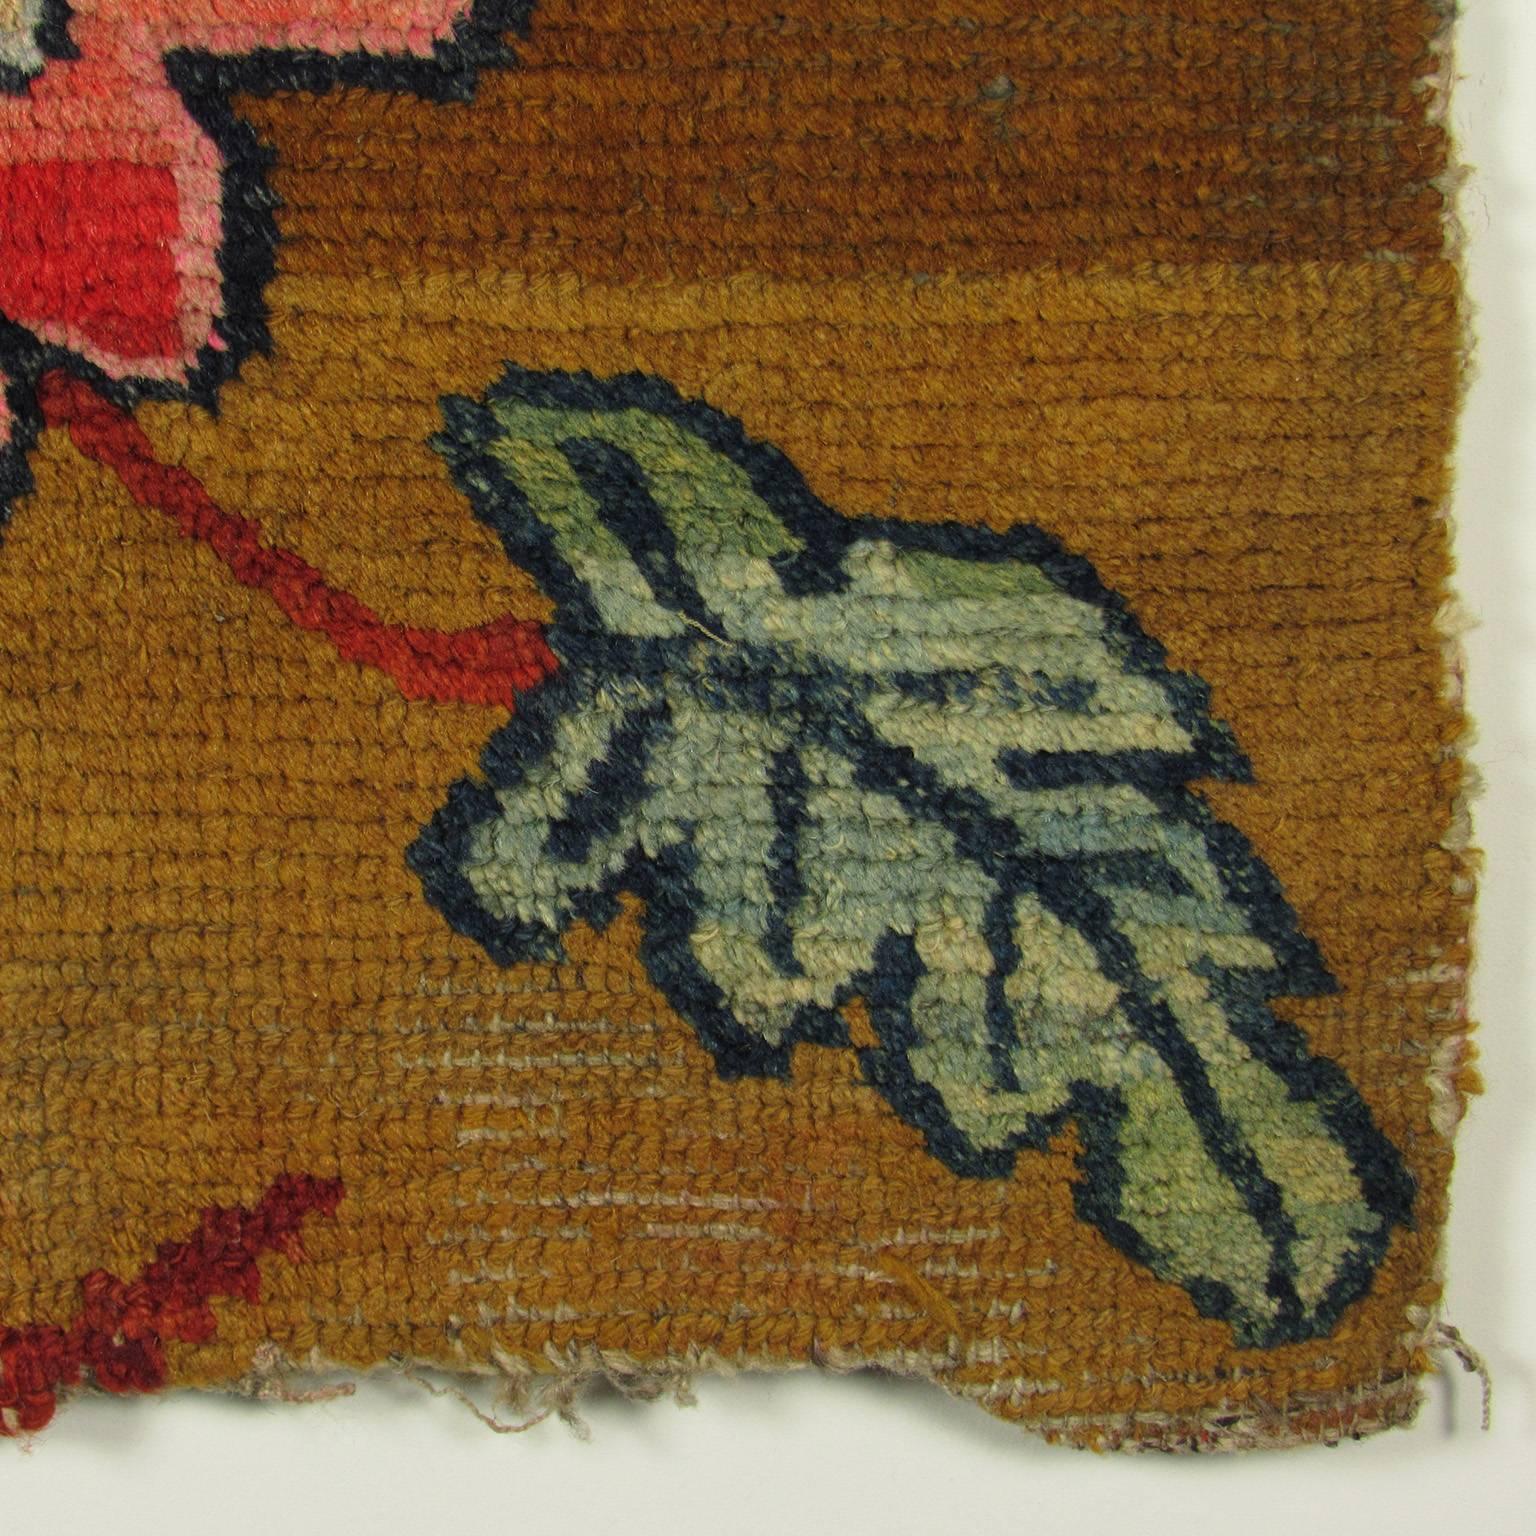 Late 19th-early 20th century antique Tibetan rug.
Measures: 32 x 21 in.